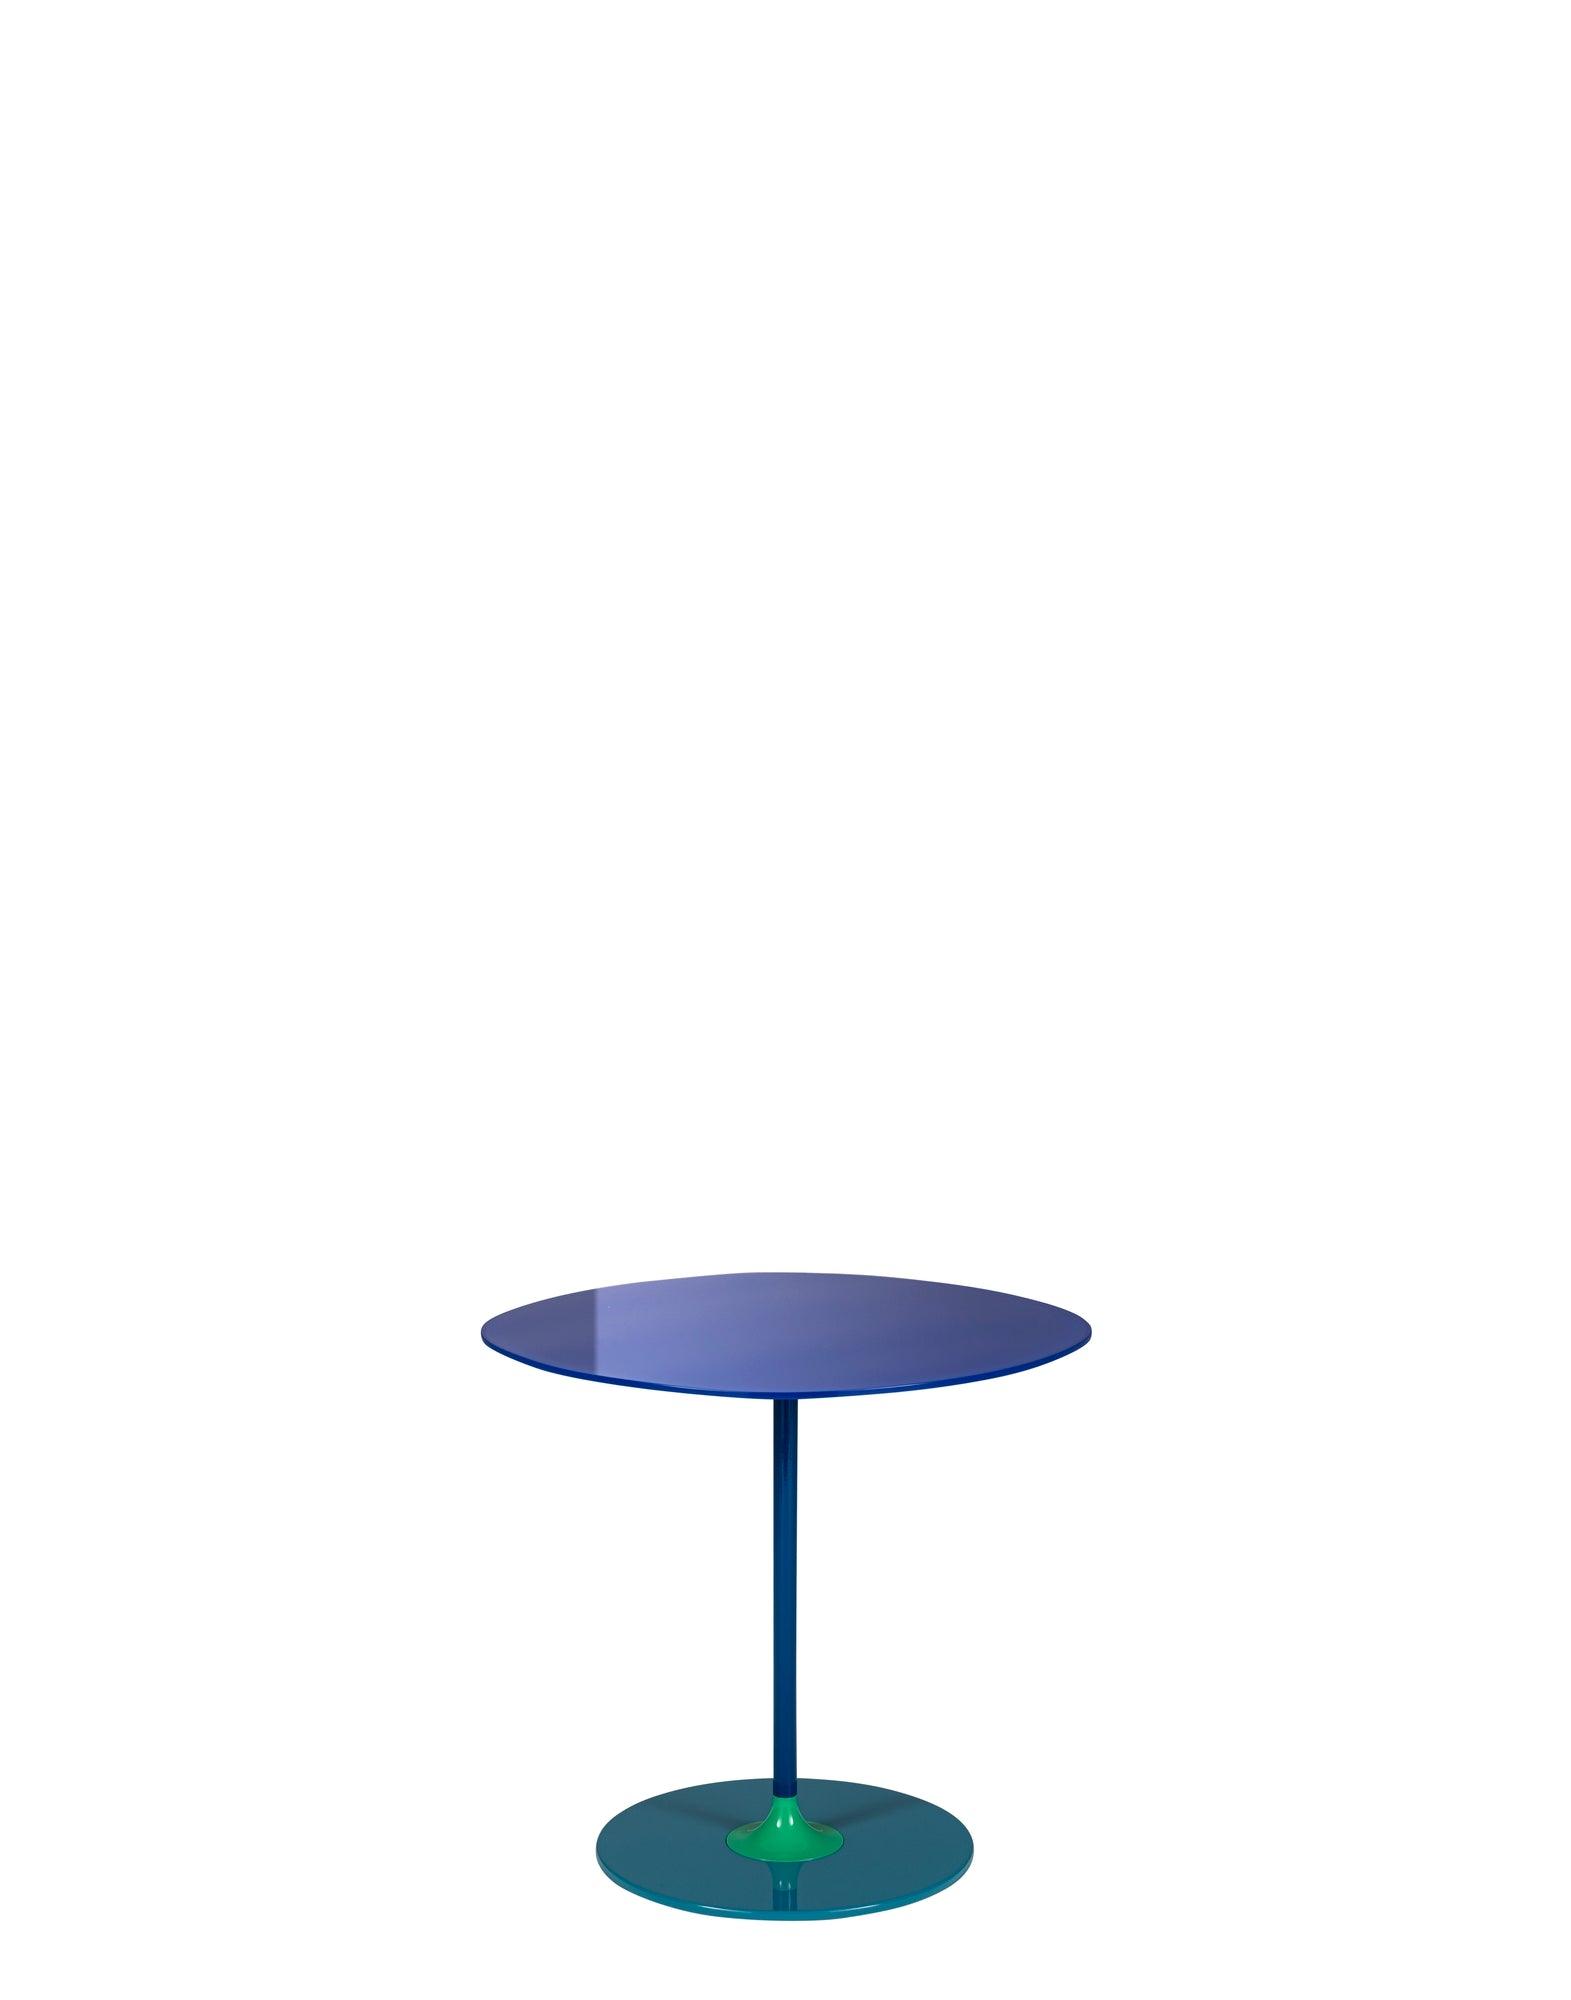 Thierry Tall Table - Curated - Furniture - Kartell